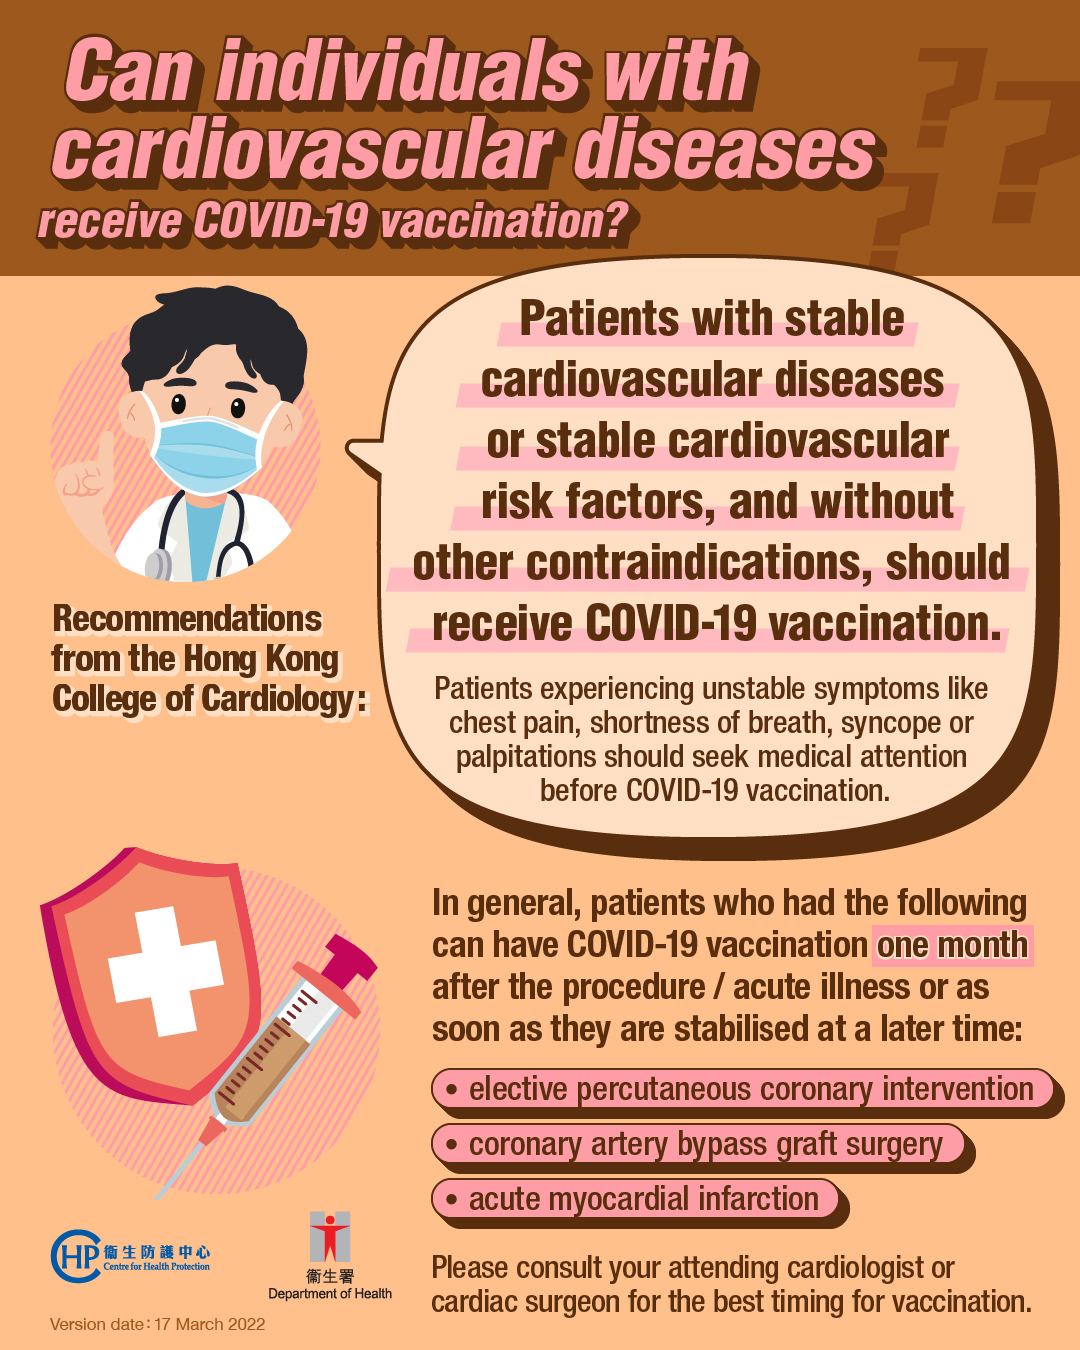 【Can individuals with cardiovascular diseases receive COVID-19 vaccination? 】